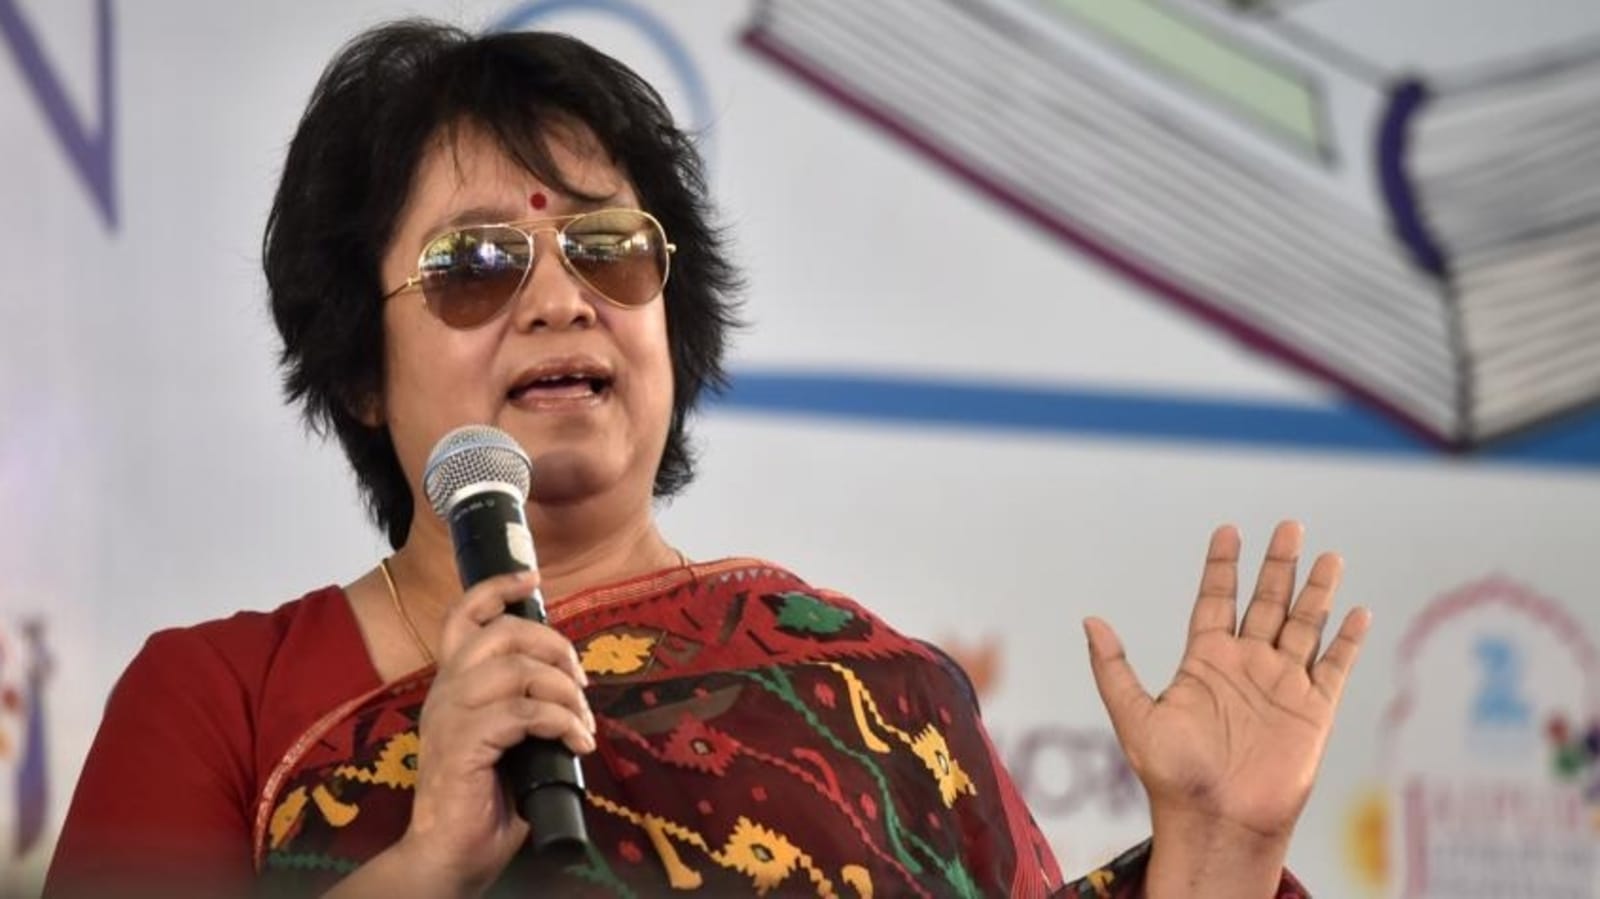 Www Bangladeshi Taslima Nasrin Xxxx Sex - Taslima Nasrin reacts after UN official claims Russian soldiers given  Viagra | World News - Hindustan Times